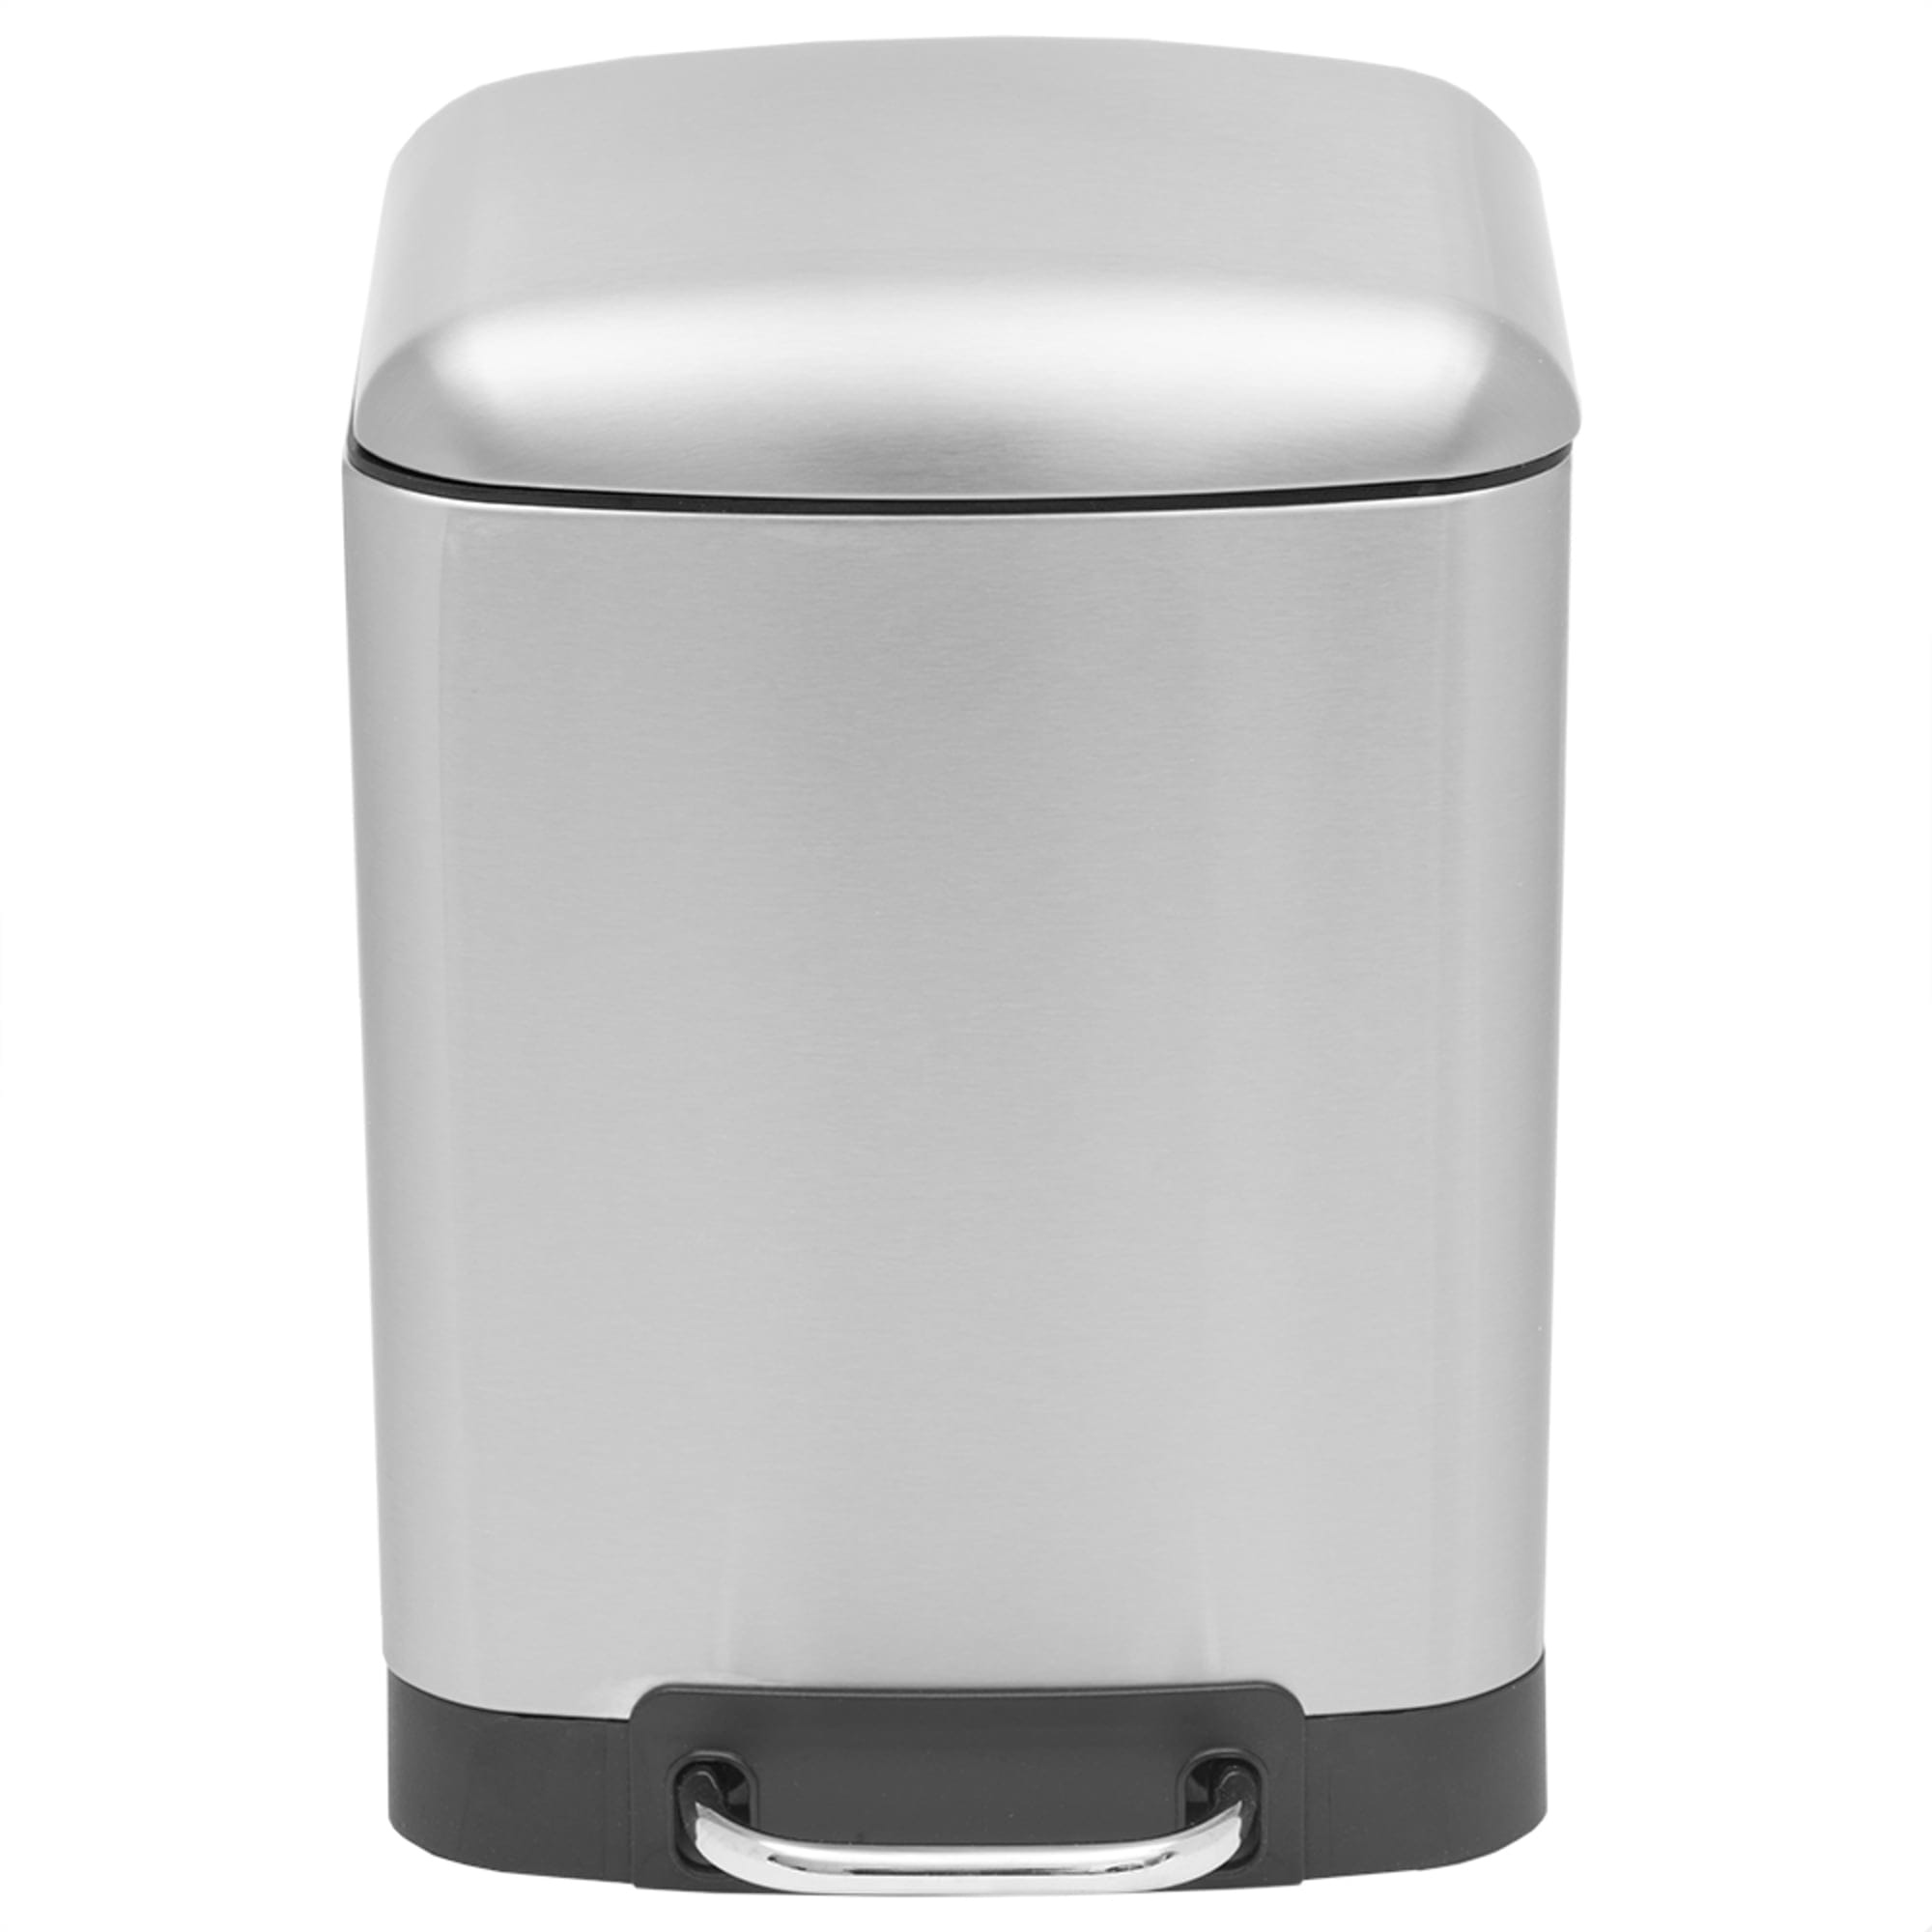 Michael Graves Design Soft Close 6 Liter Step On Stainless Steel Waste Bin, Silver $20.00 EACH, CASE PACK OF 4